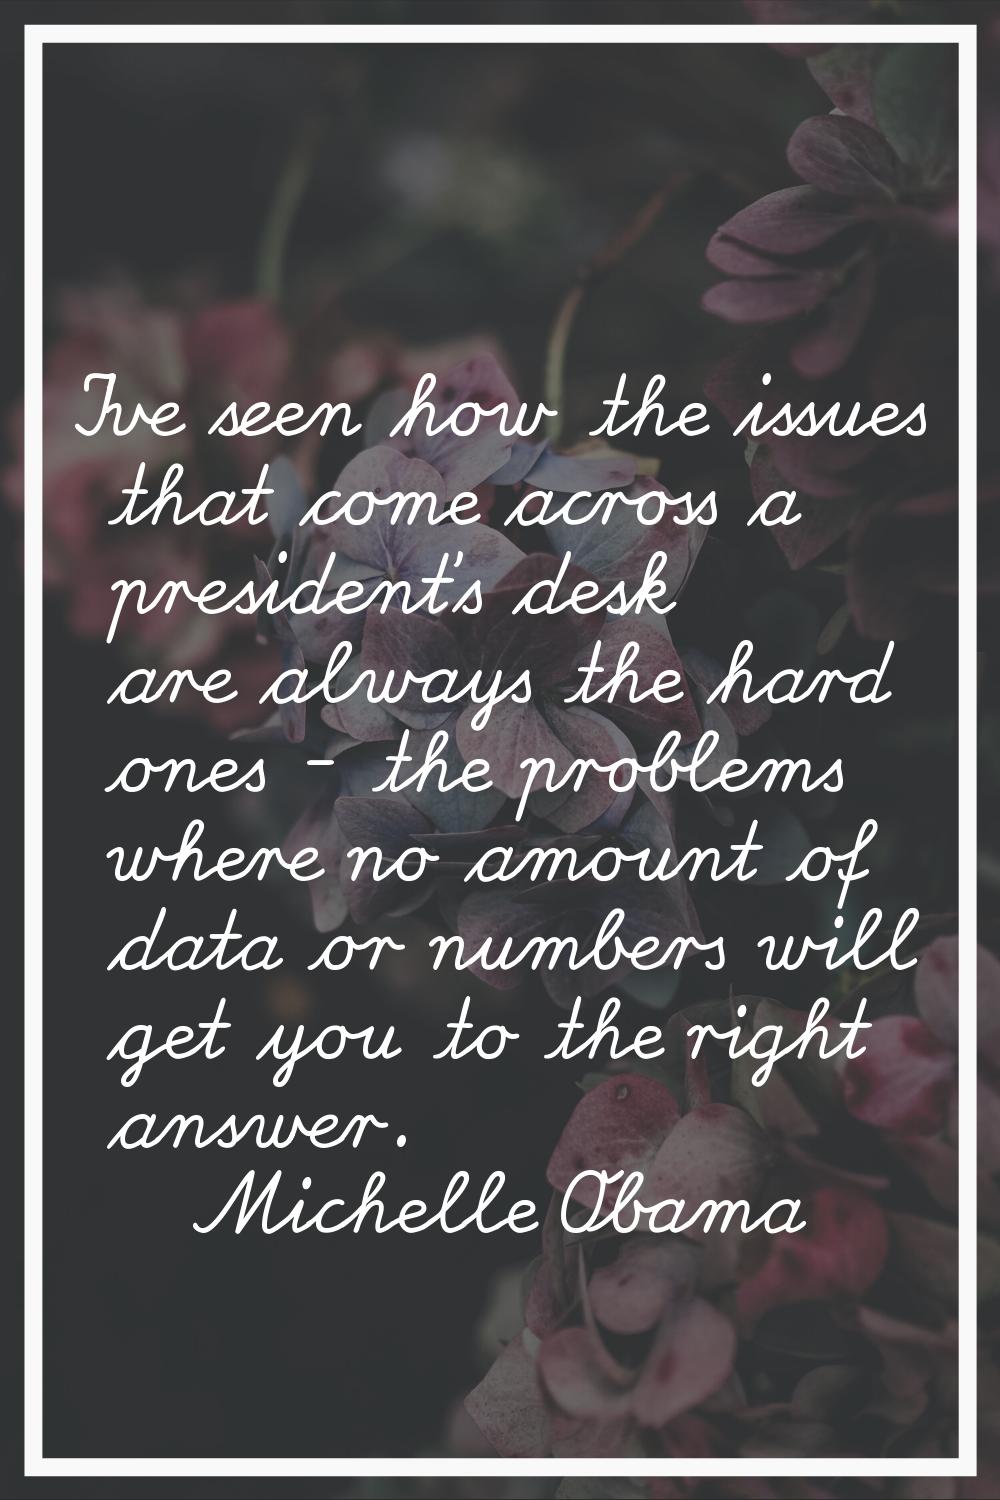 I've seen how the issues that come across a president's desk are always the hard ones - the problem